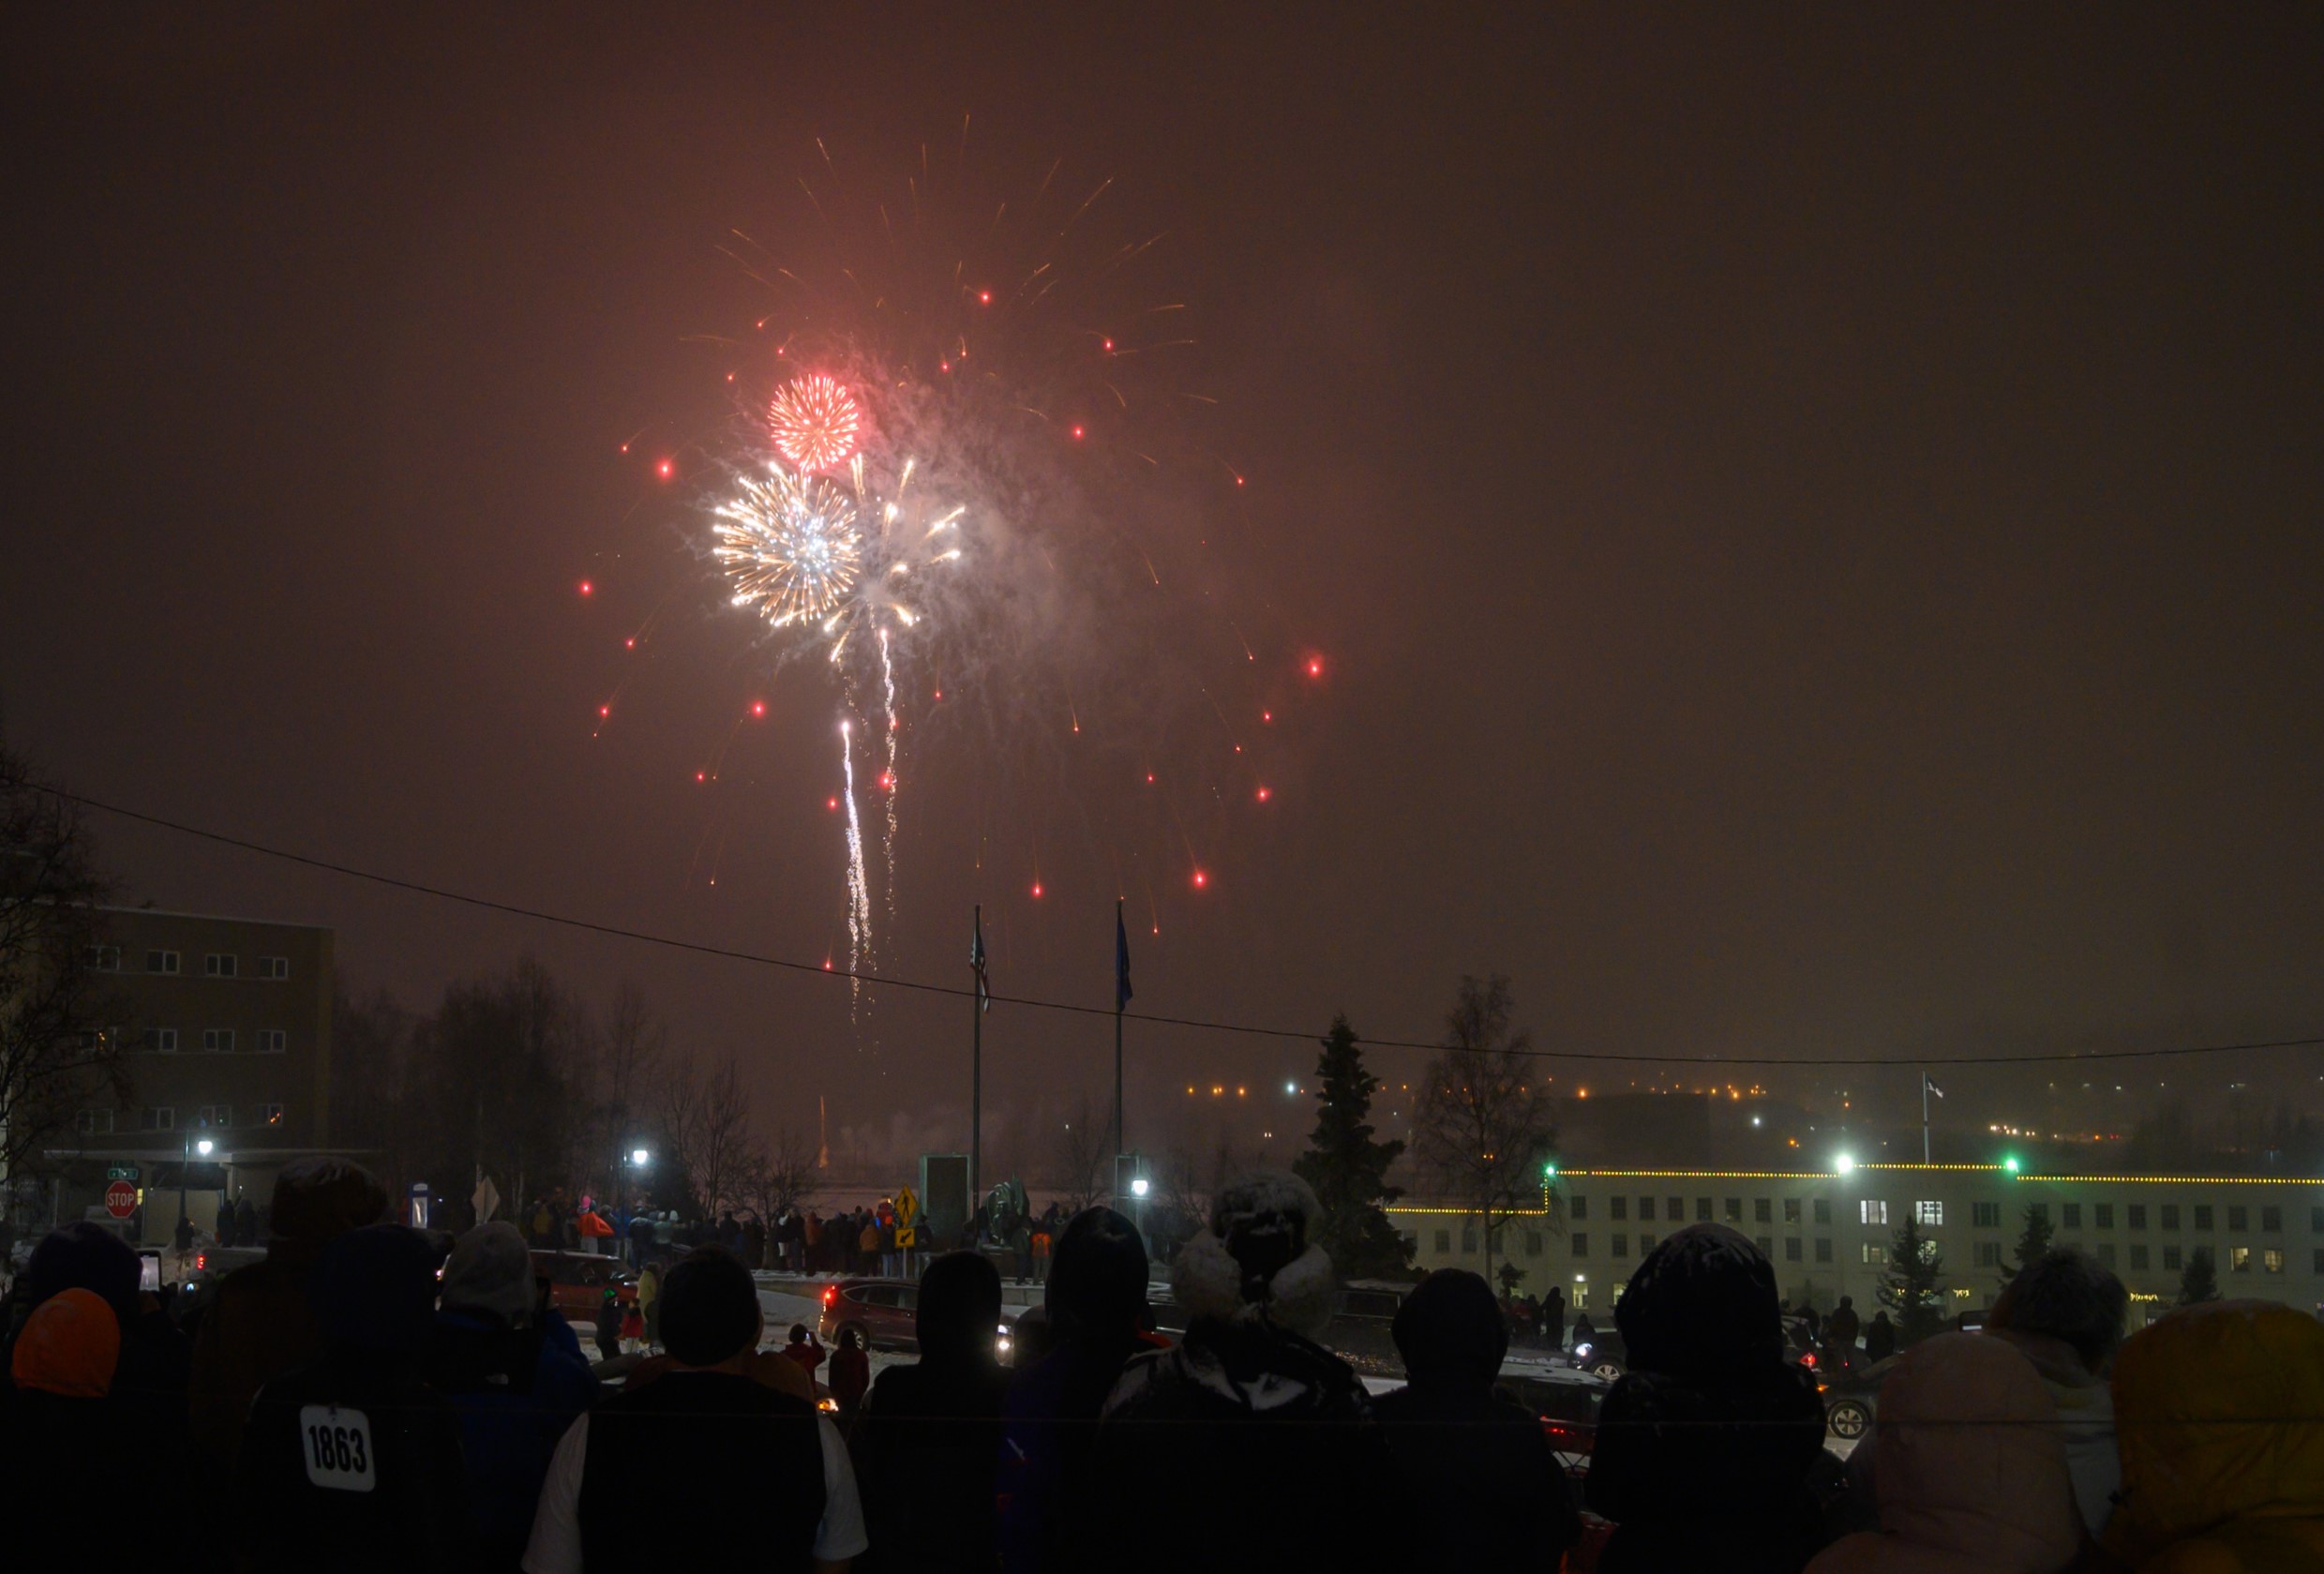 Live performances and outdoor activities planned for Anchorage New Year